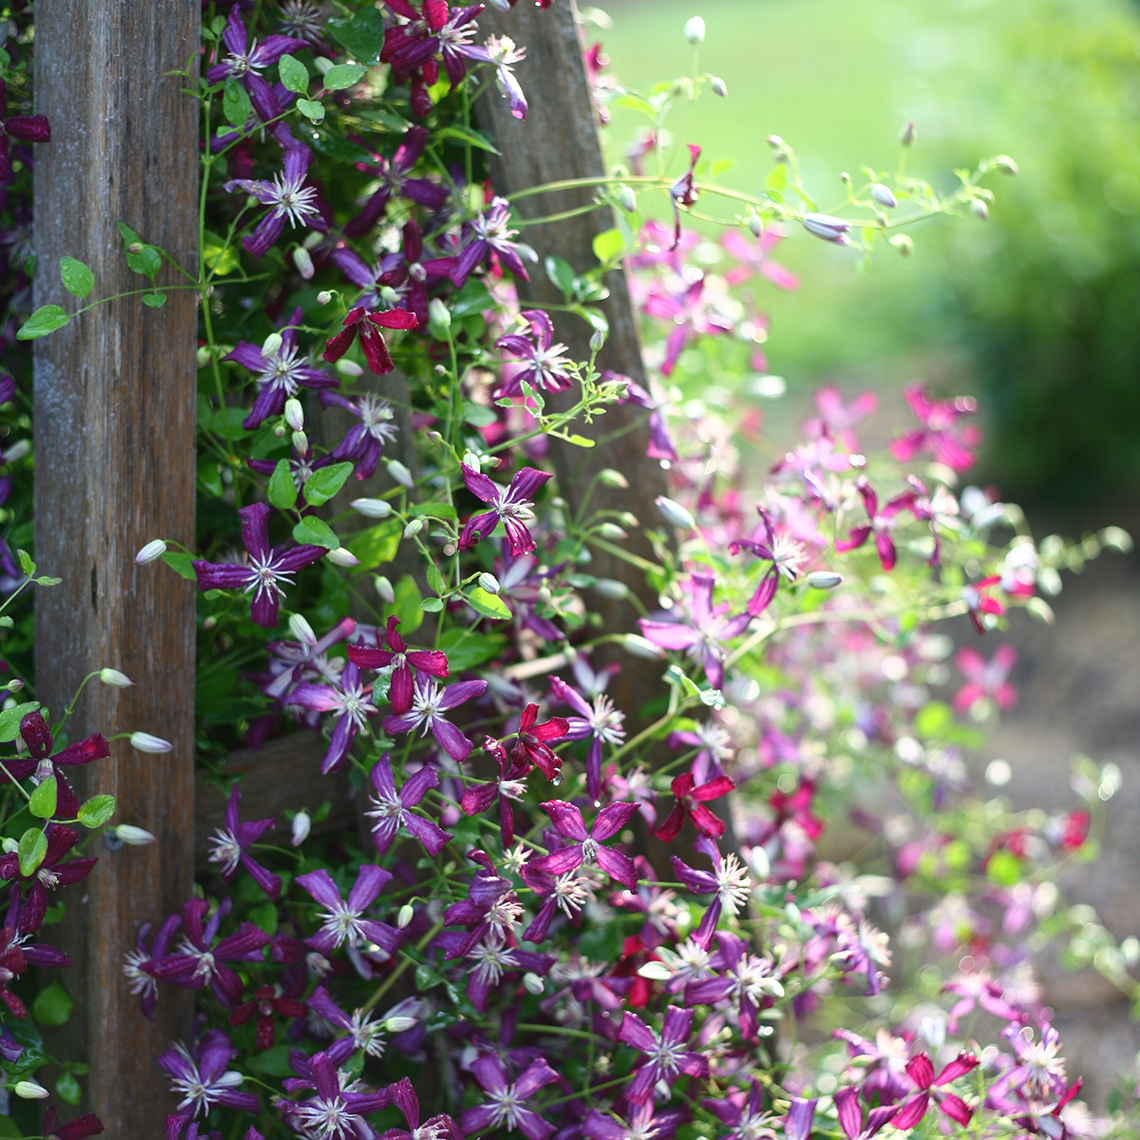 Hundreds of Clematis Sweet Summer Love buds and blooms spilling from wooden trellis